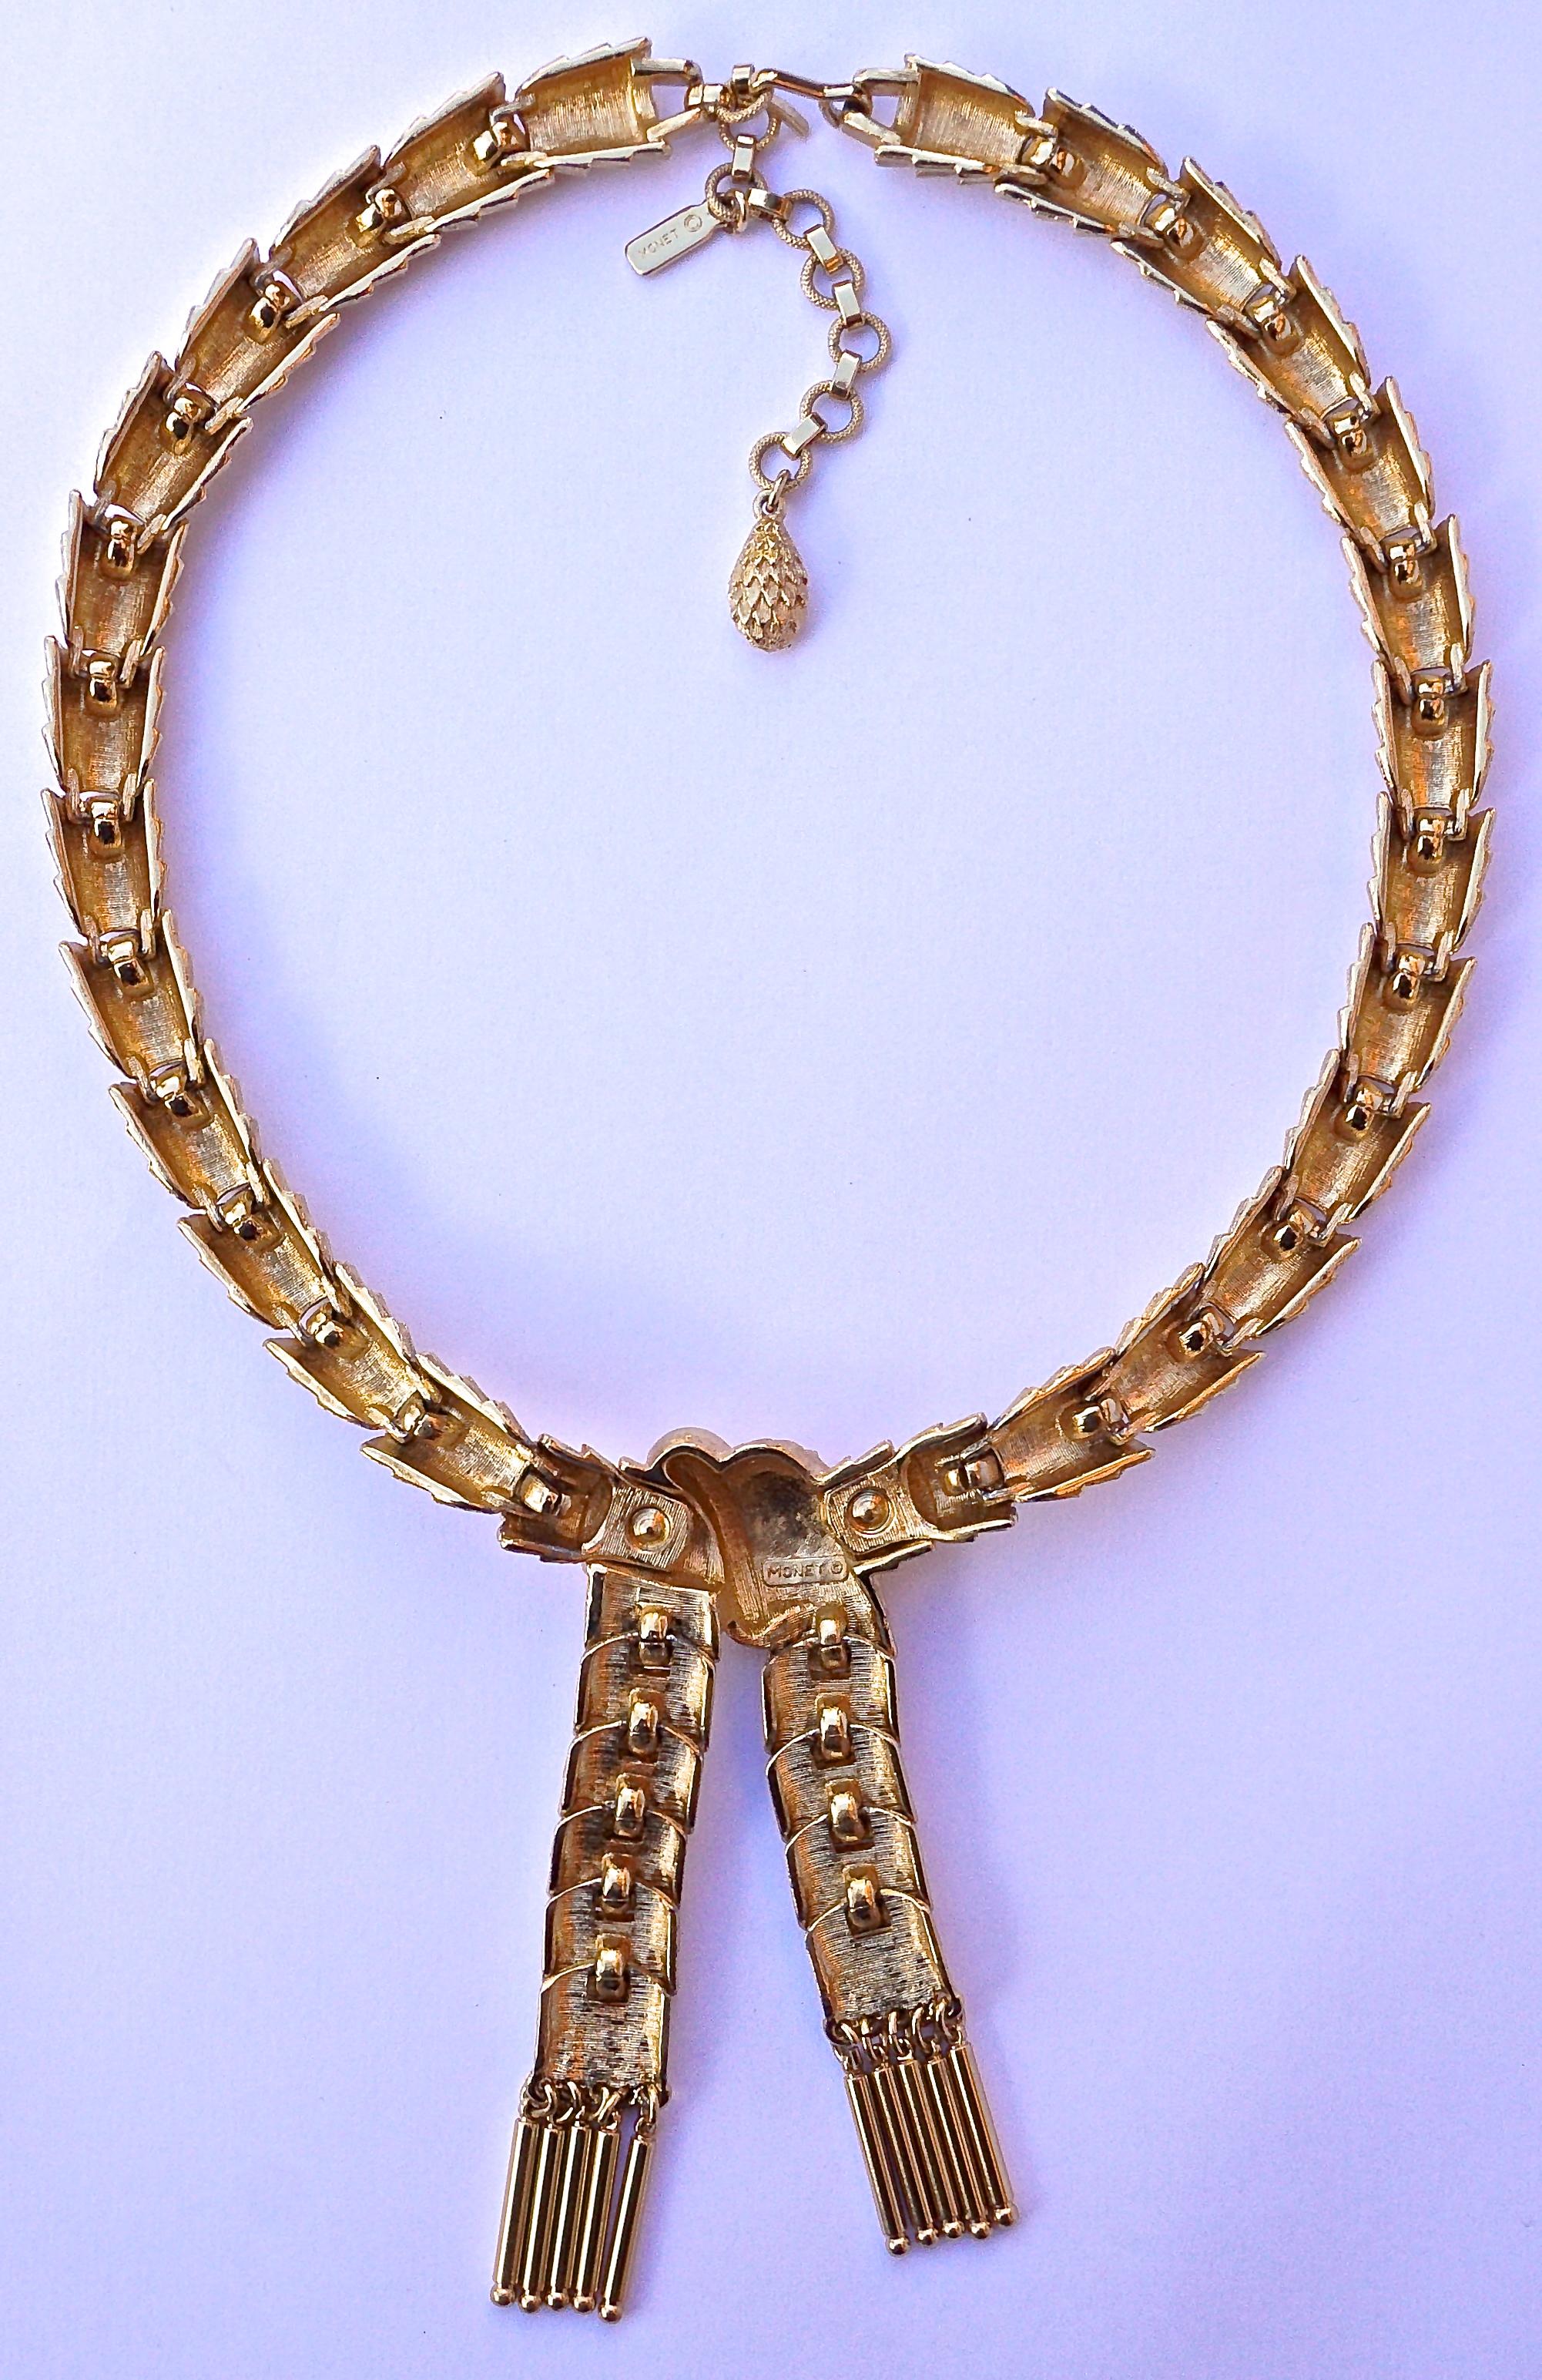 Fabulous Monet gold plated link textured collar necklace, featuring a ribbon design dropping from the necklace with shiny golden accents. It is in very good condition. The necklace measures length 44.5cm, 17.5 inches, including the extension, and